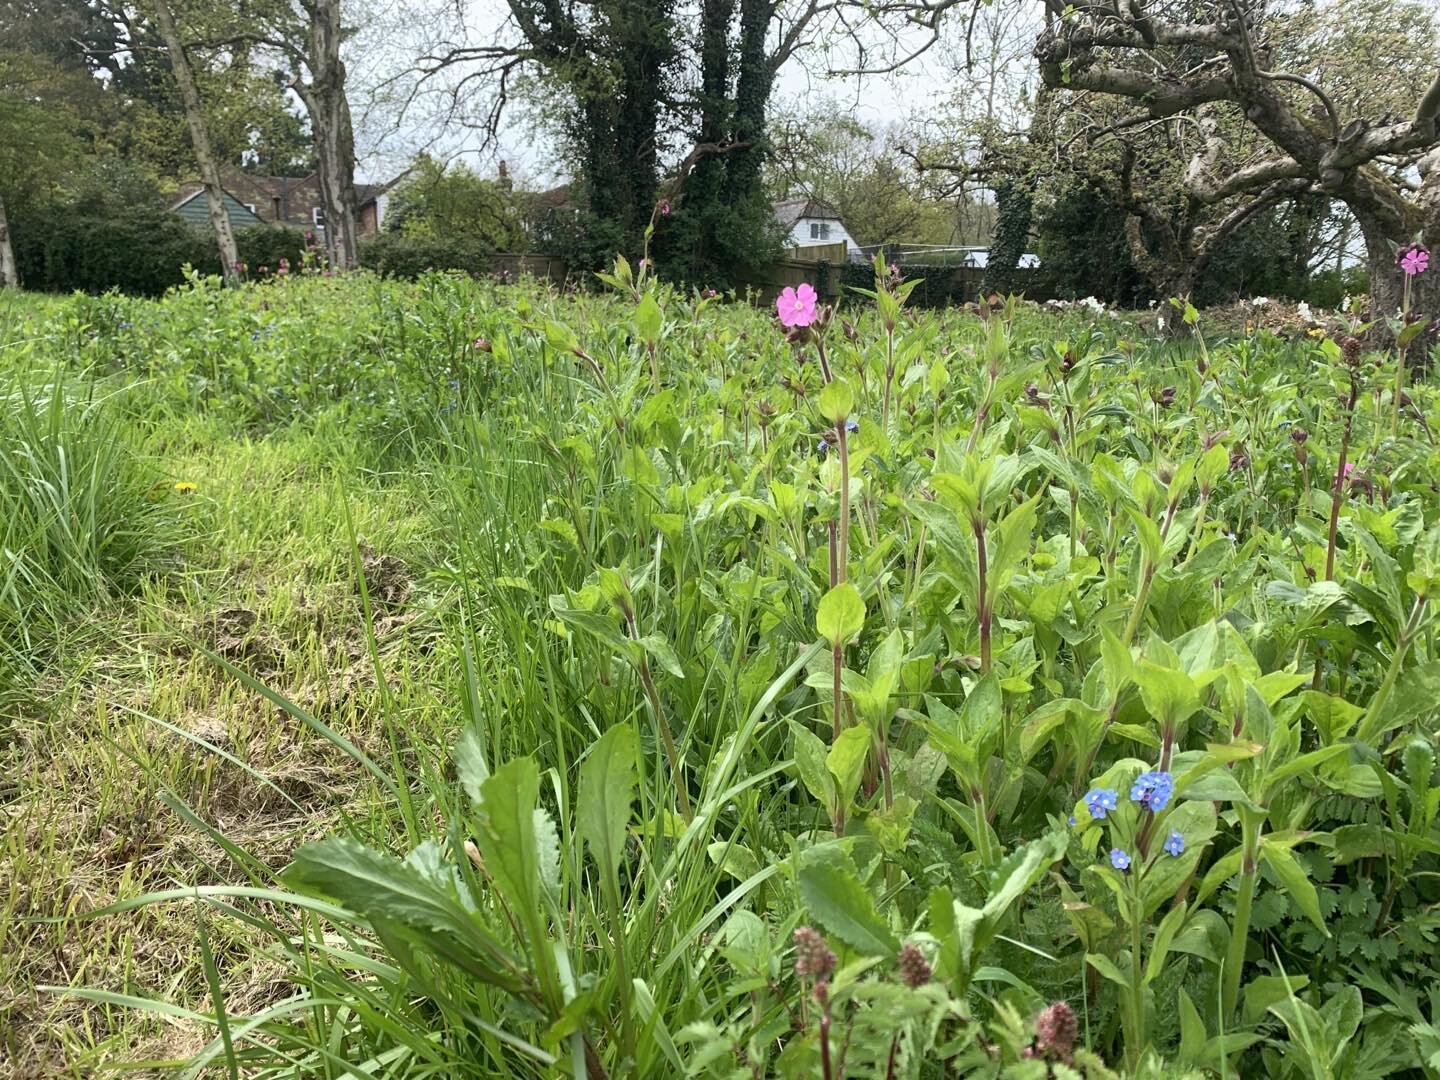 But the wild (ish) flower meadow is now a year old and looking very healthy and lush #wildflowers #wildflowermeadow #gardening